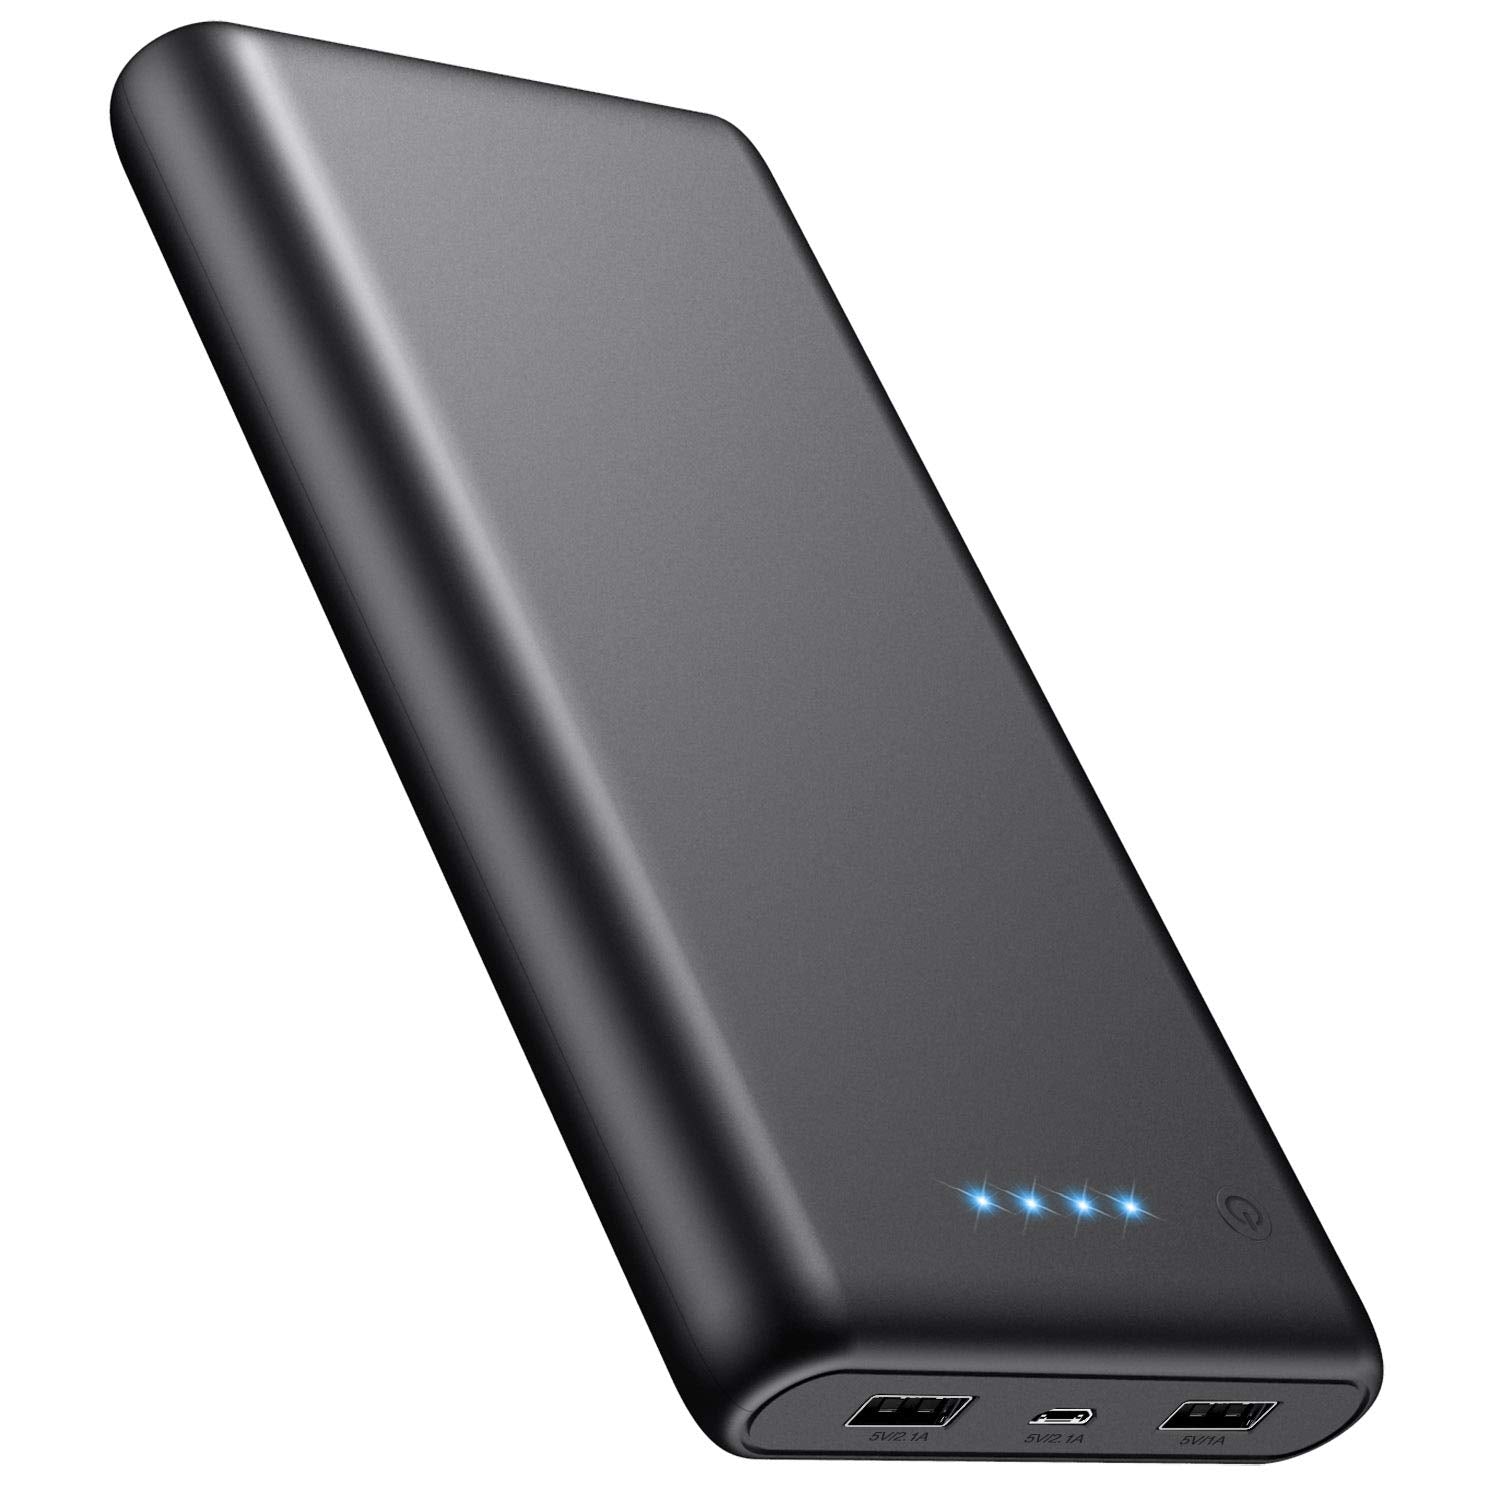 CHHID LCD Display Portable Charger Power Bank,26800mAh High-Capacity Dual  USB Battery Pack, External Battery Cell Phone Charger Compatible with  iPhone,Android etc. – Specs Tech